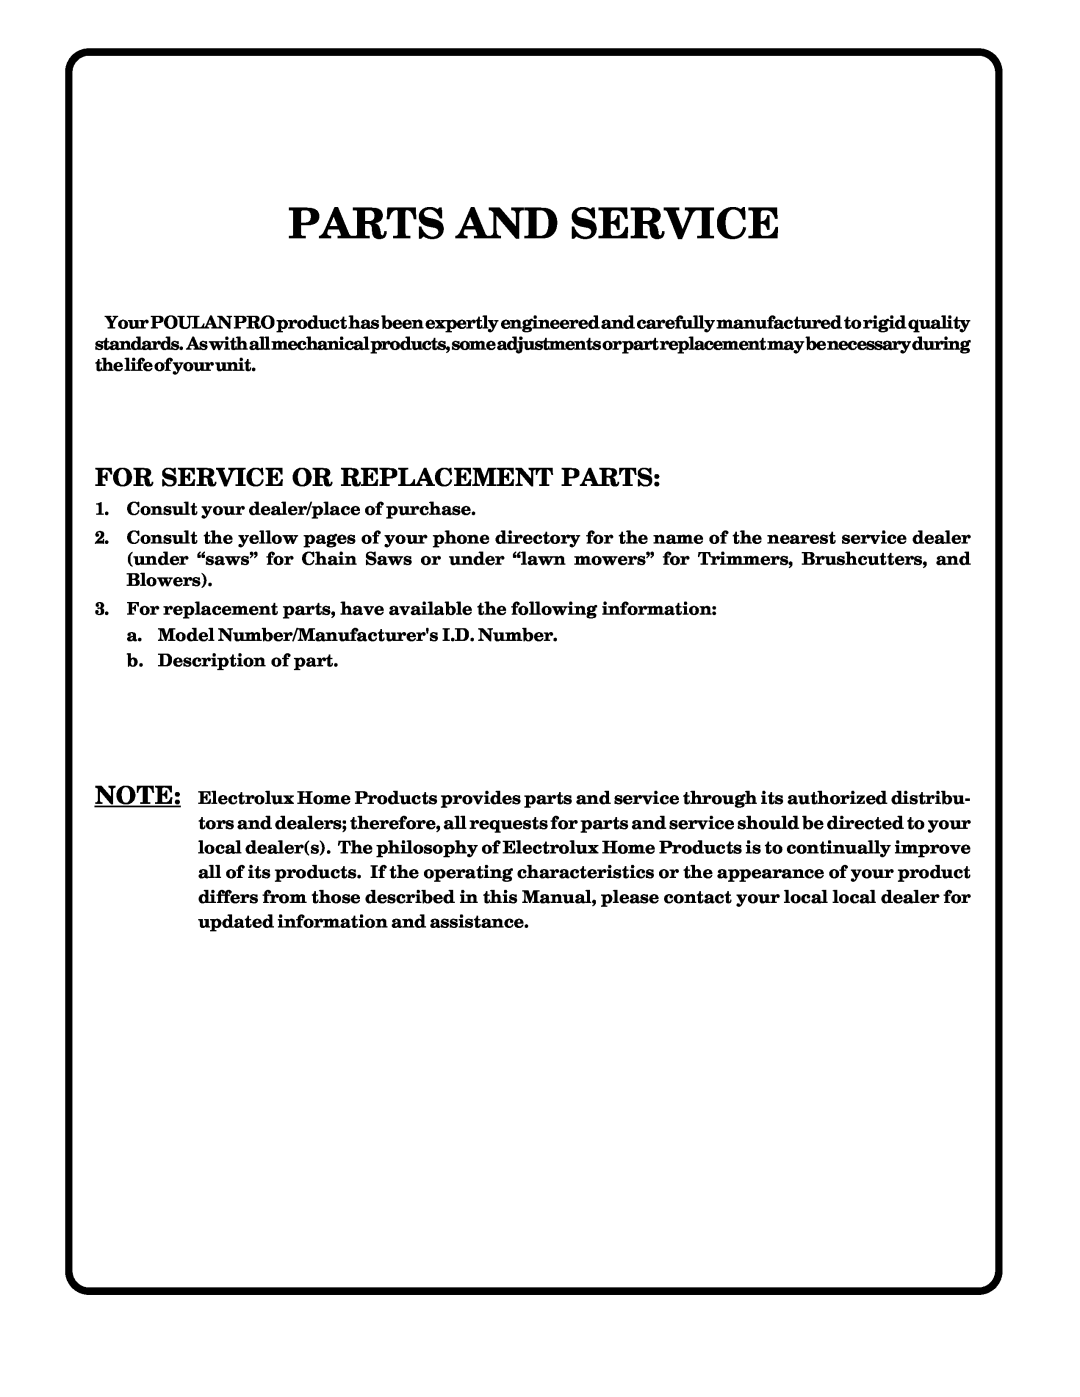 Poulan 178227 owner manual Parts And Service, For Service Or Replacement Parts 